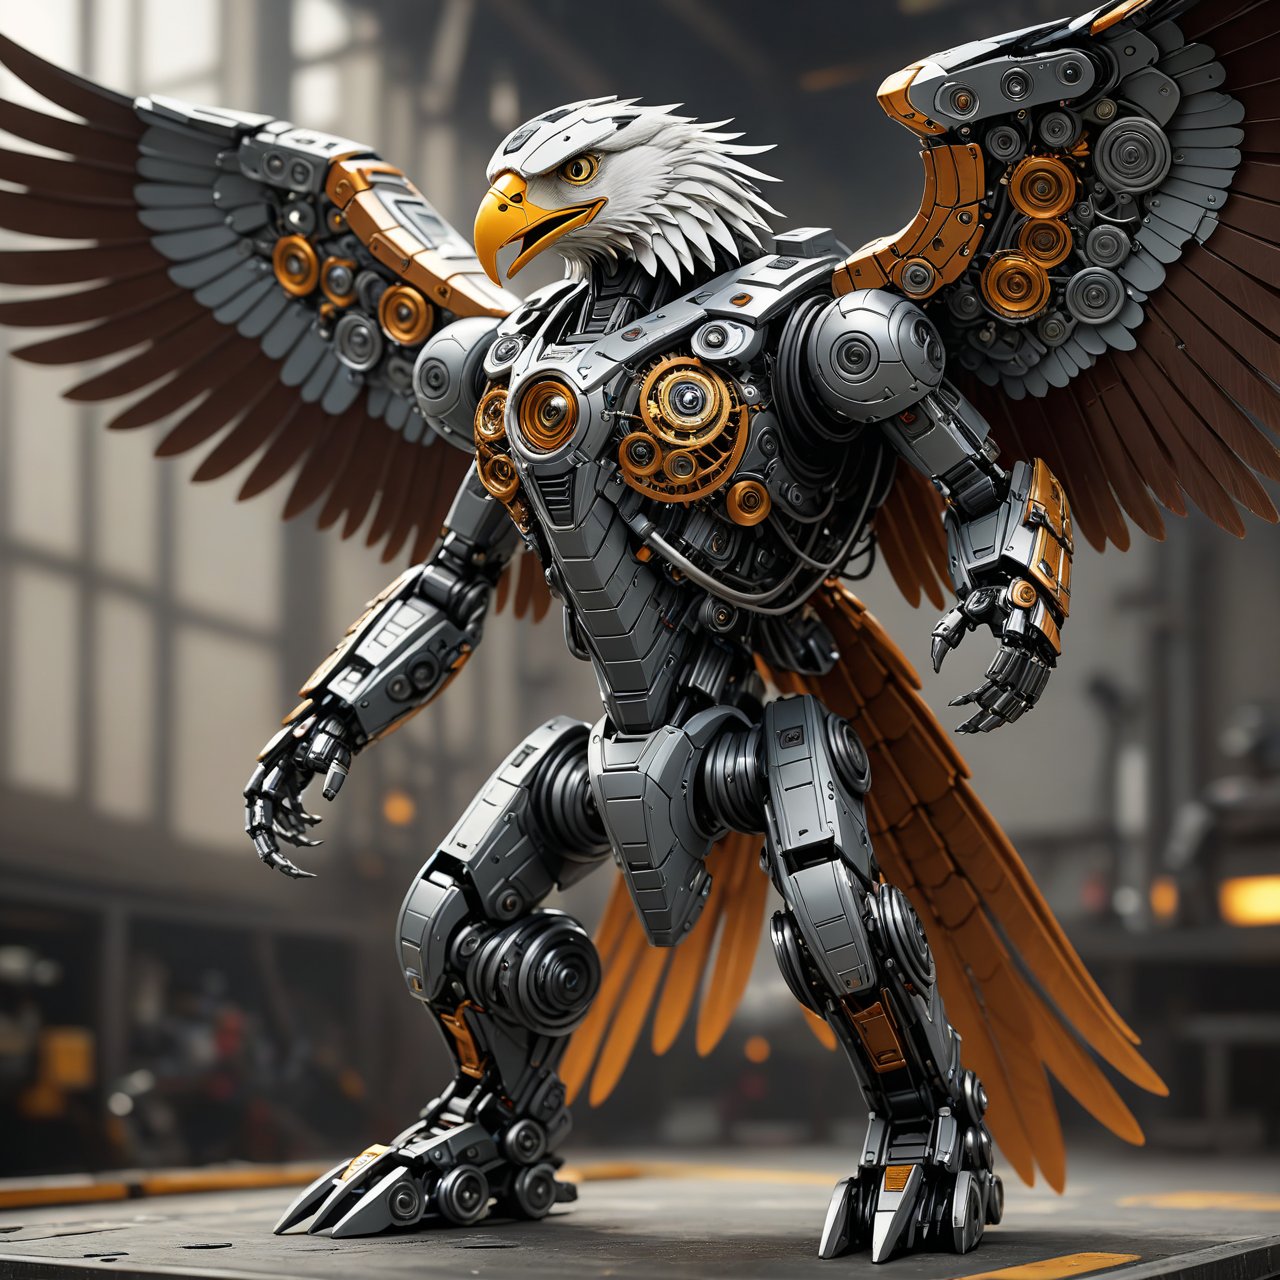 Robotic eagle, Spread wings,mini heans, 8k, unreal engine render, wires and gears, photorealistic,ROBOT